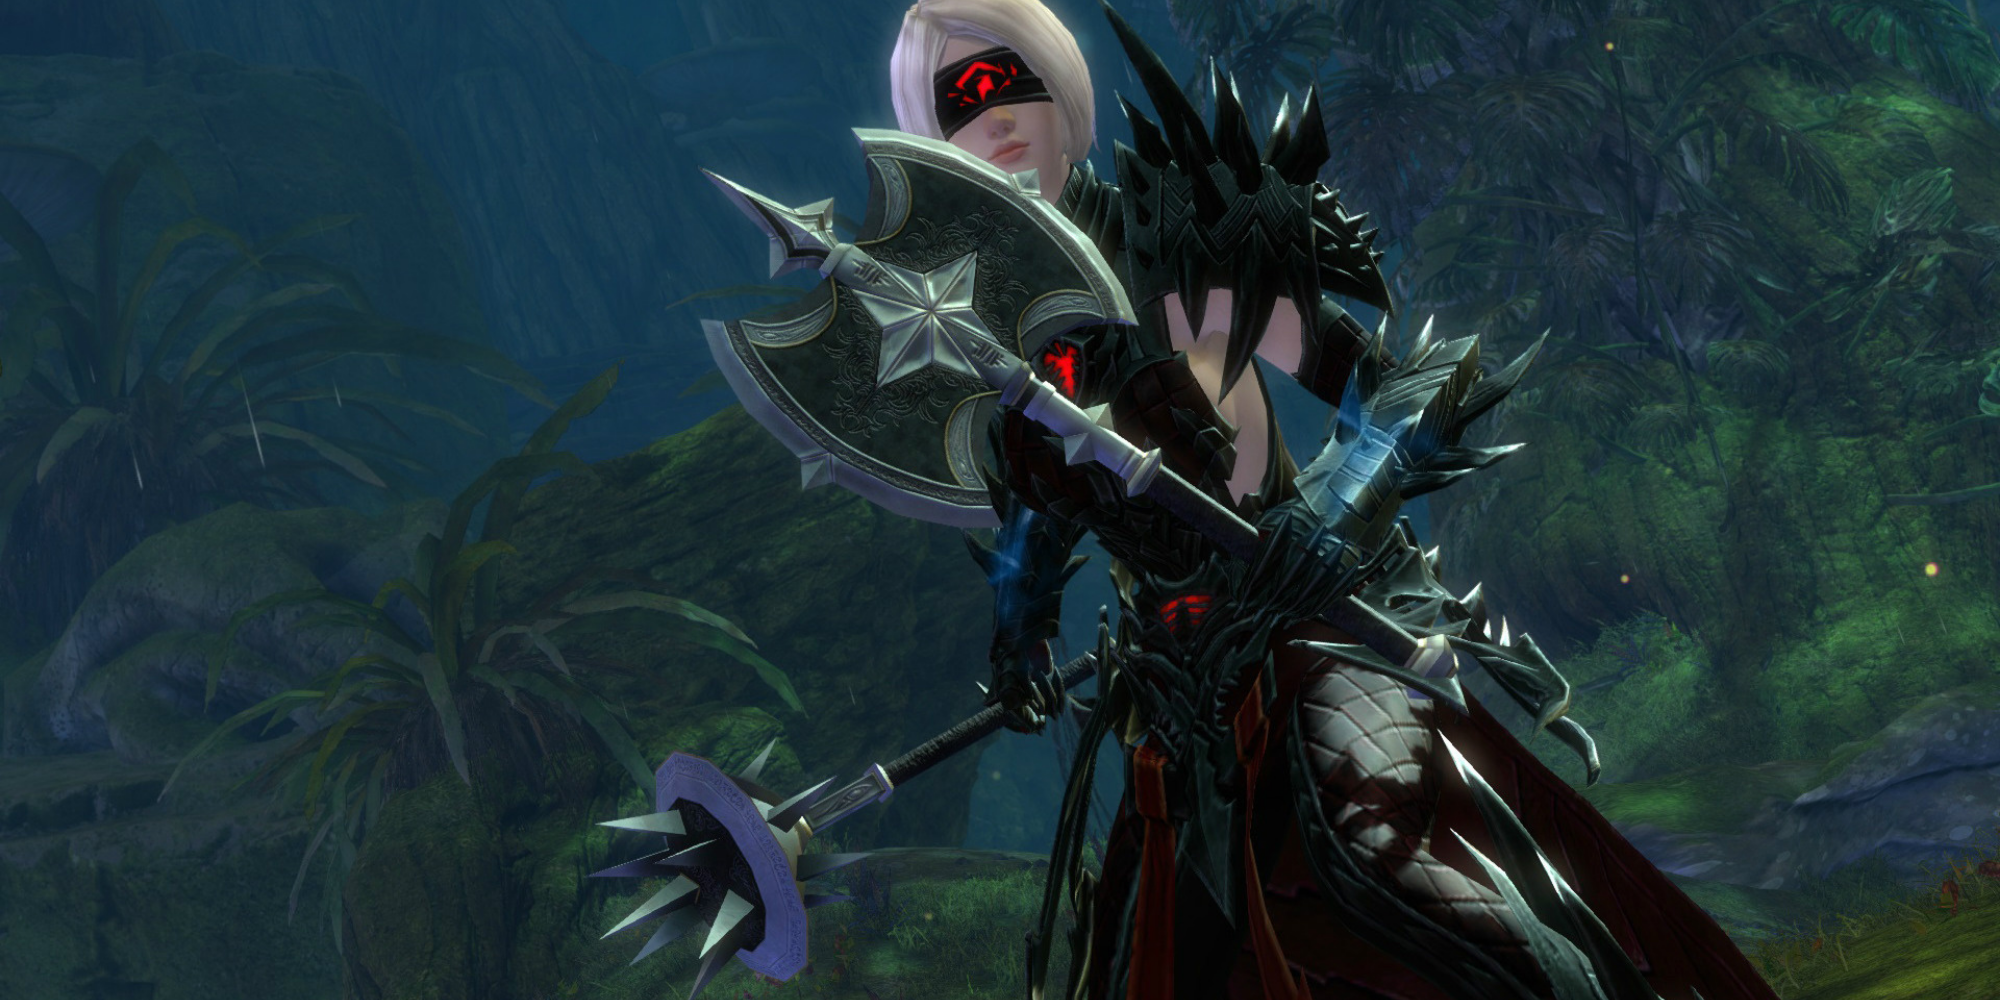 Guild Wars 2 - Revenant wielding an axe and a mace